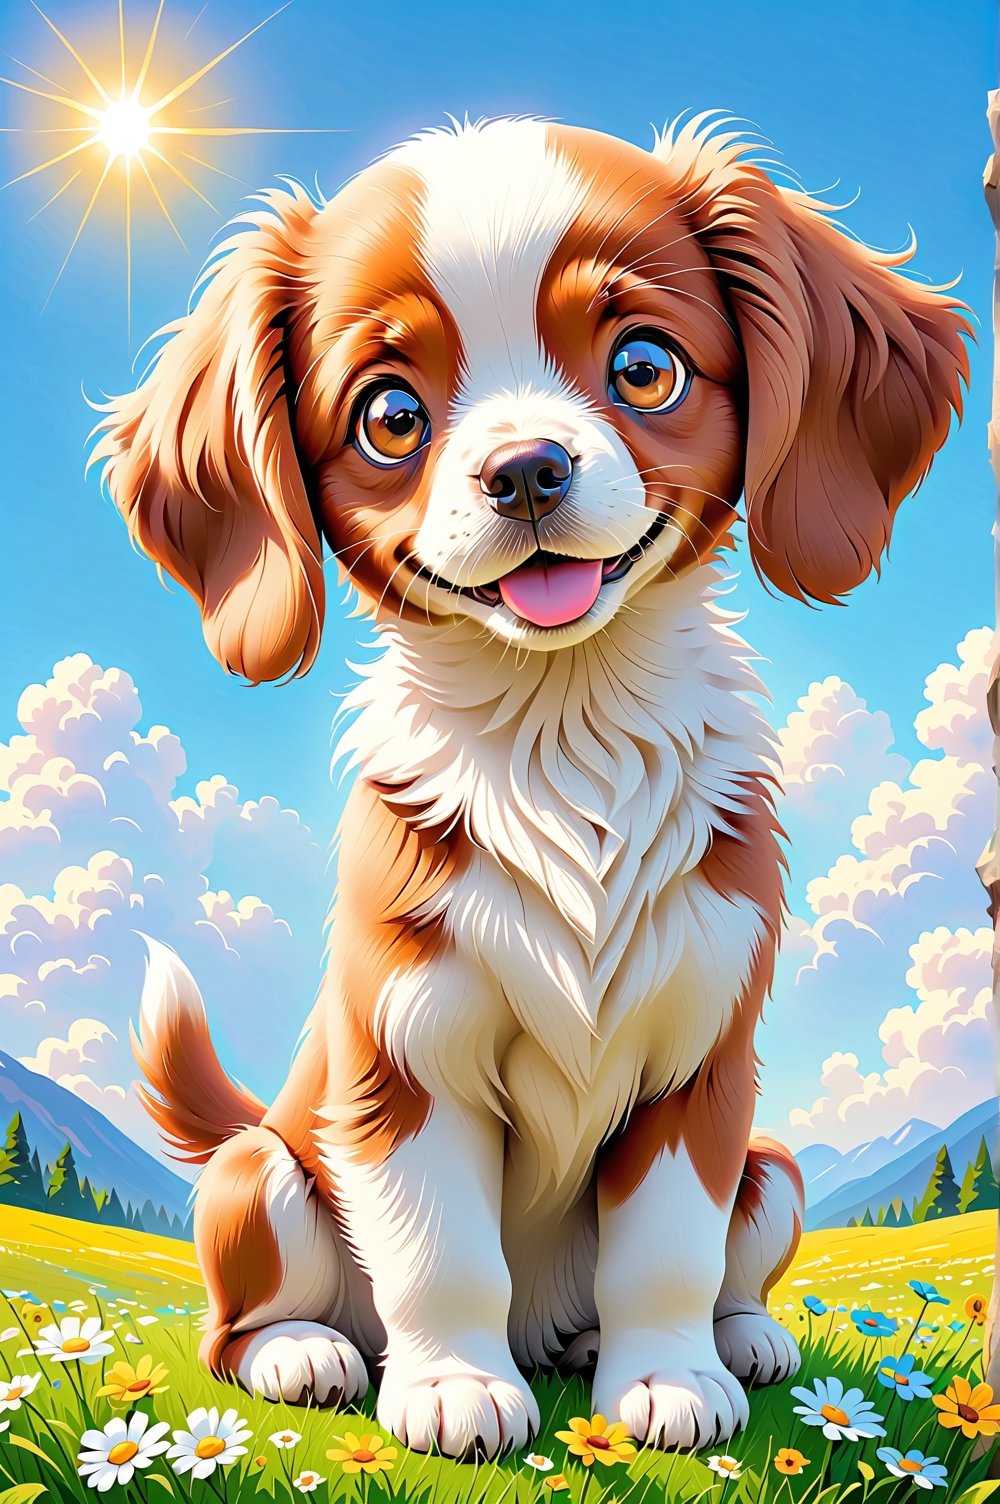 A captivating digital painting of a young Brittany puppy sitting in a comical pose, with its head tilted and an expression of doubt on its face. The puppy's eyes are filled with curiosity, and its fur is rendered with incredible detail and a vibrant sheen. The background showcases a serene spring weather scene, with blooming flowers, a blue sky, and a warm sun. This adorable and heartwarming artwork captures the essence of youthful innocence and the beauty of nature during the onset of spring.